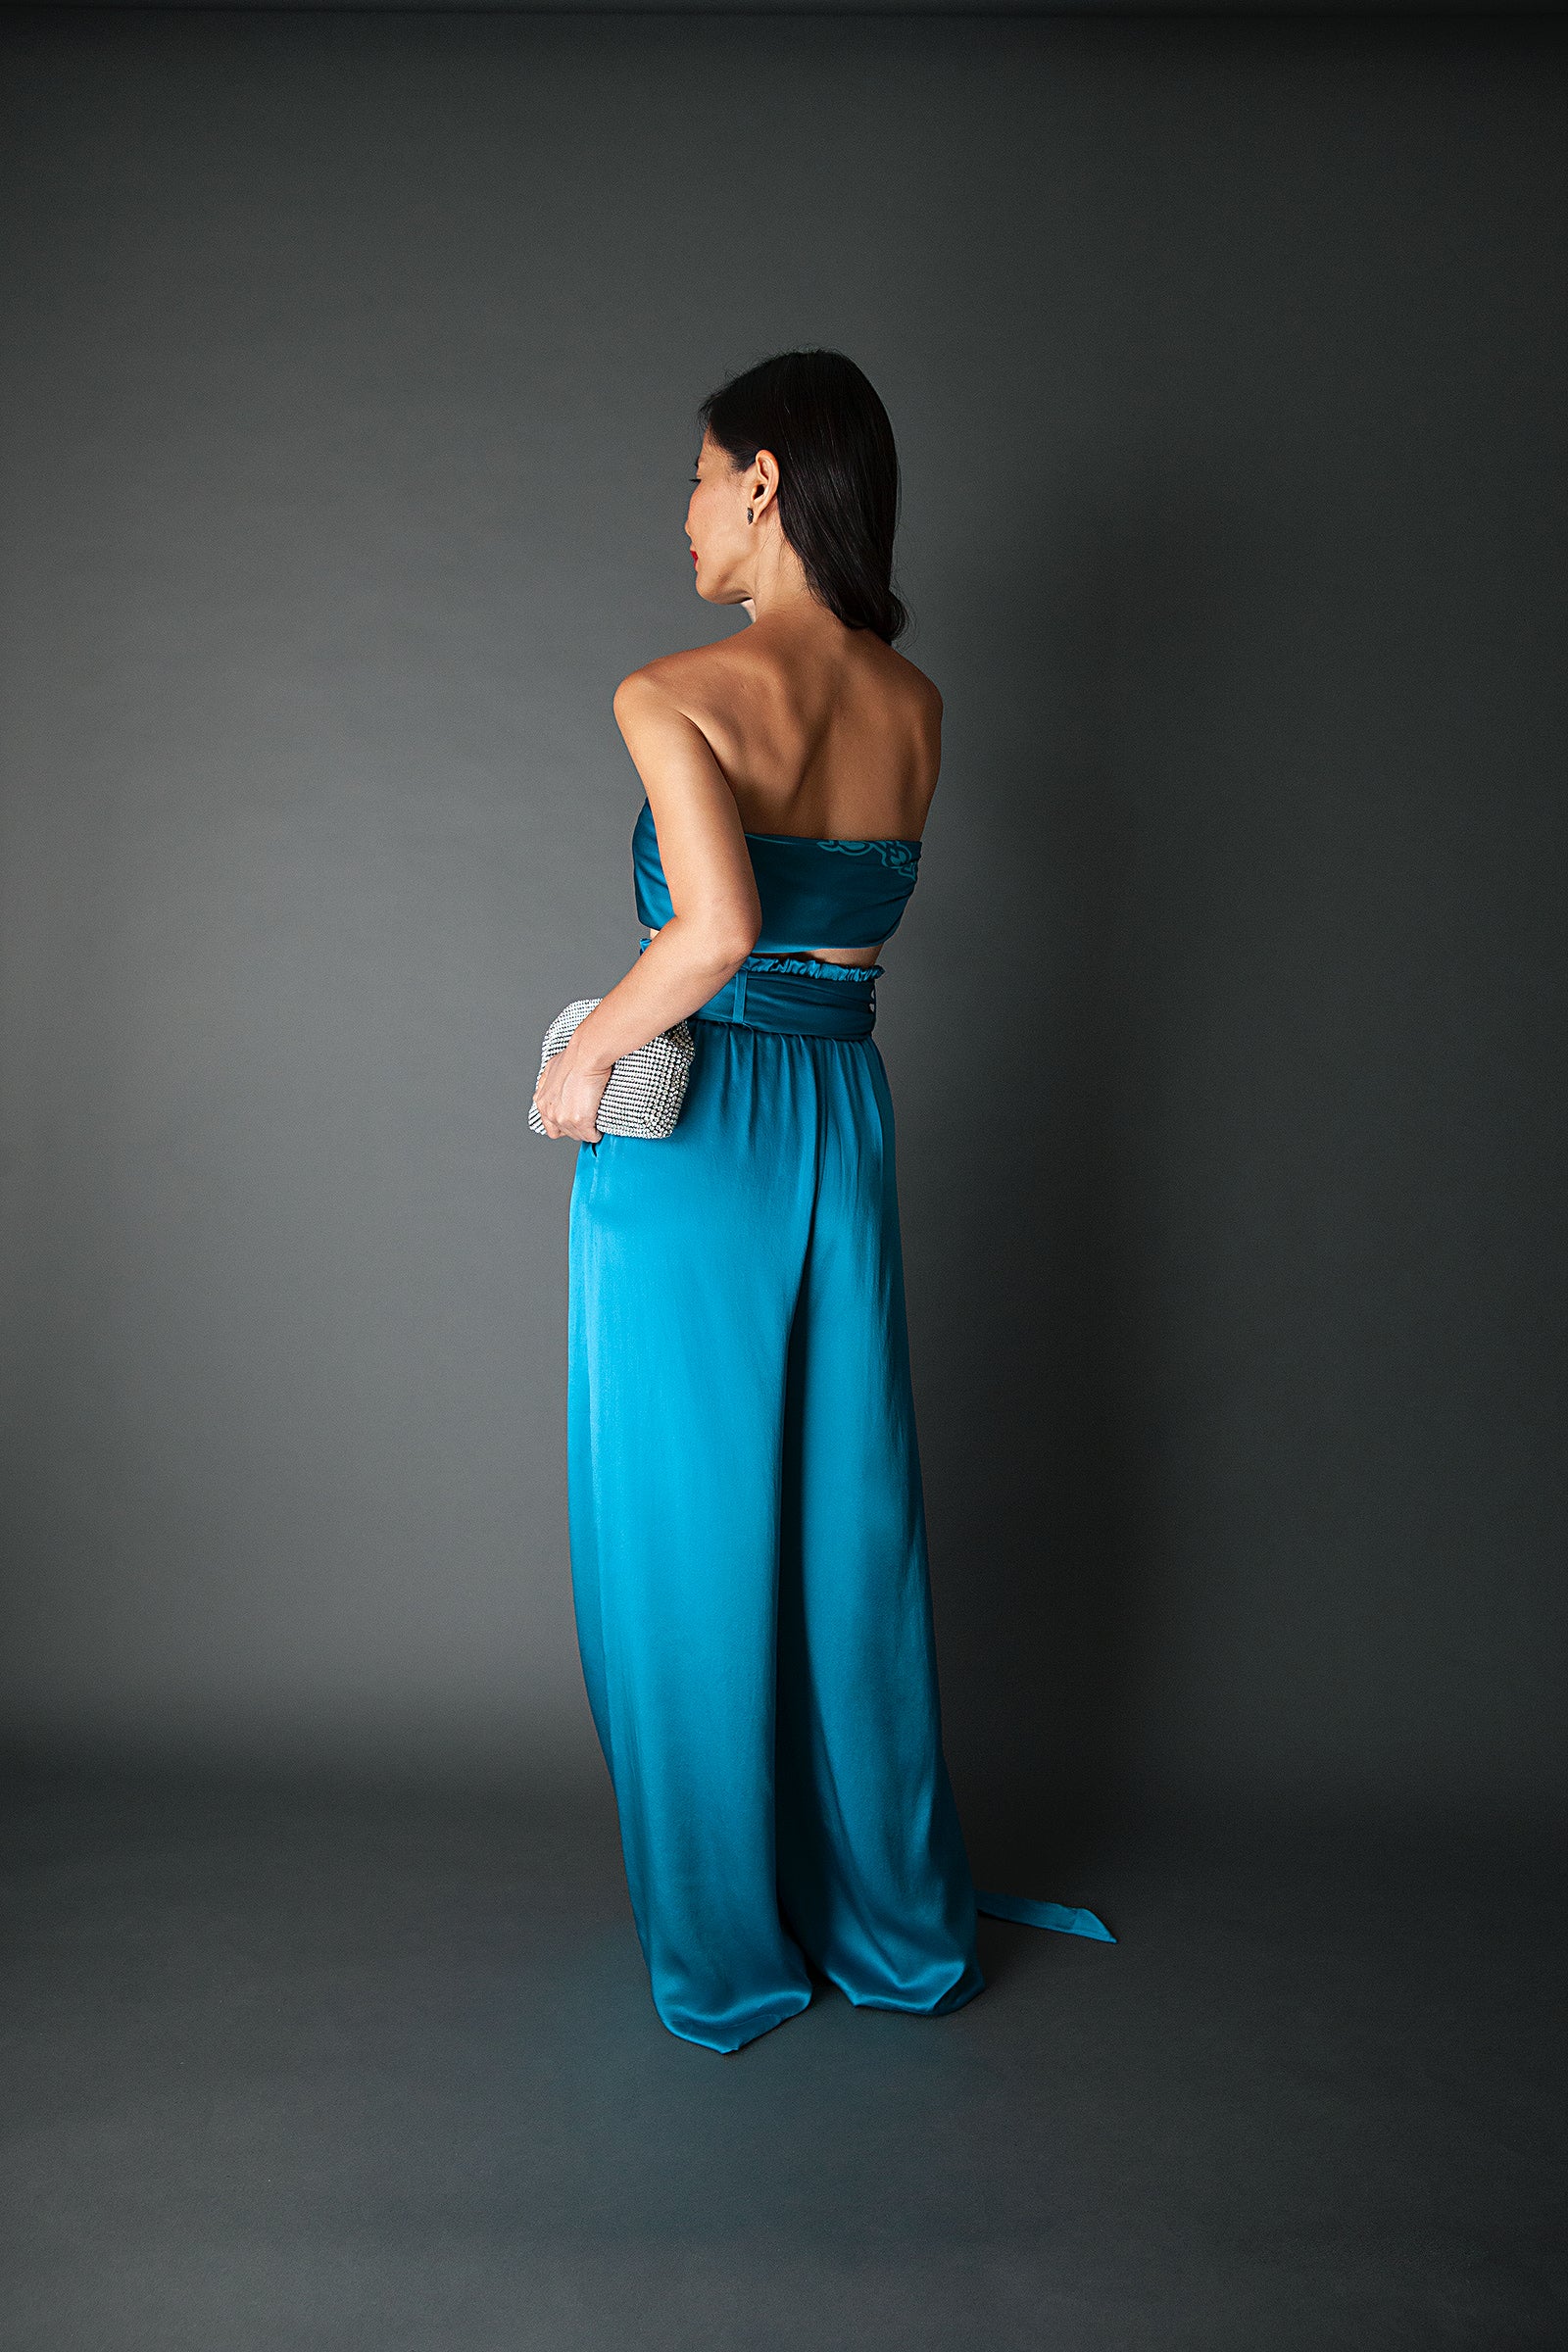 Pants under skirt | Fashion, Gorgeous gowns, Couture fashion